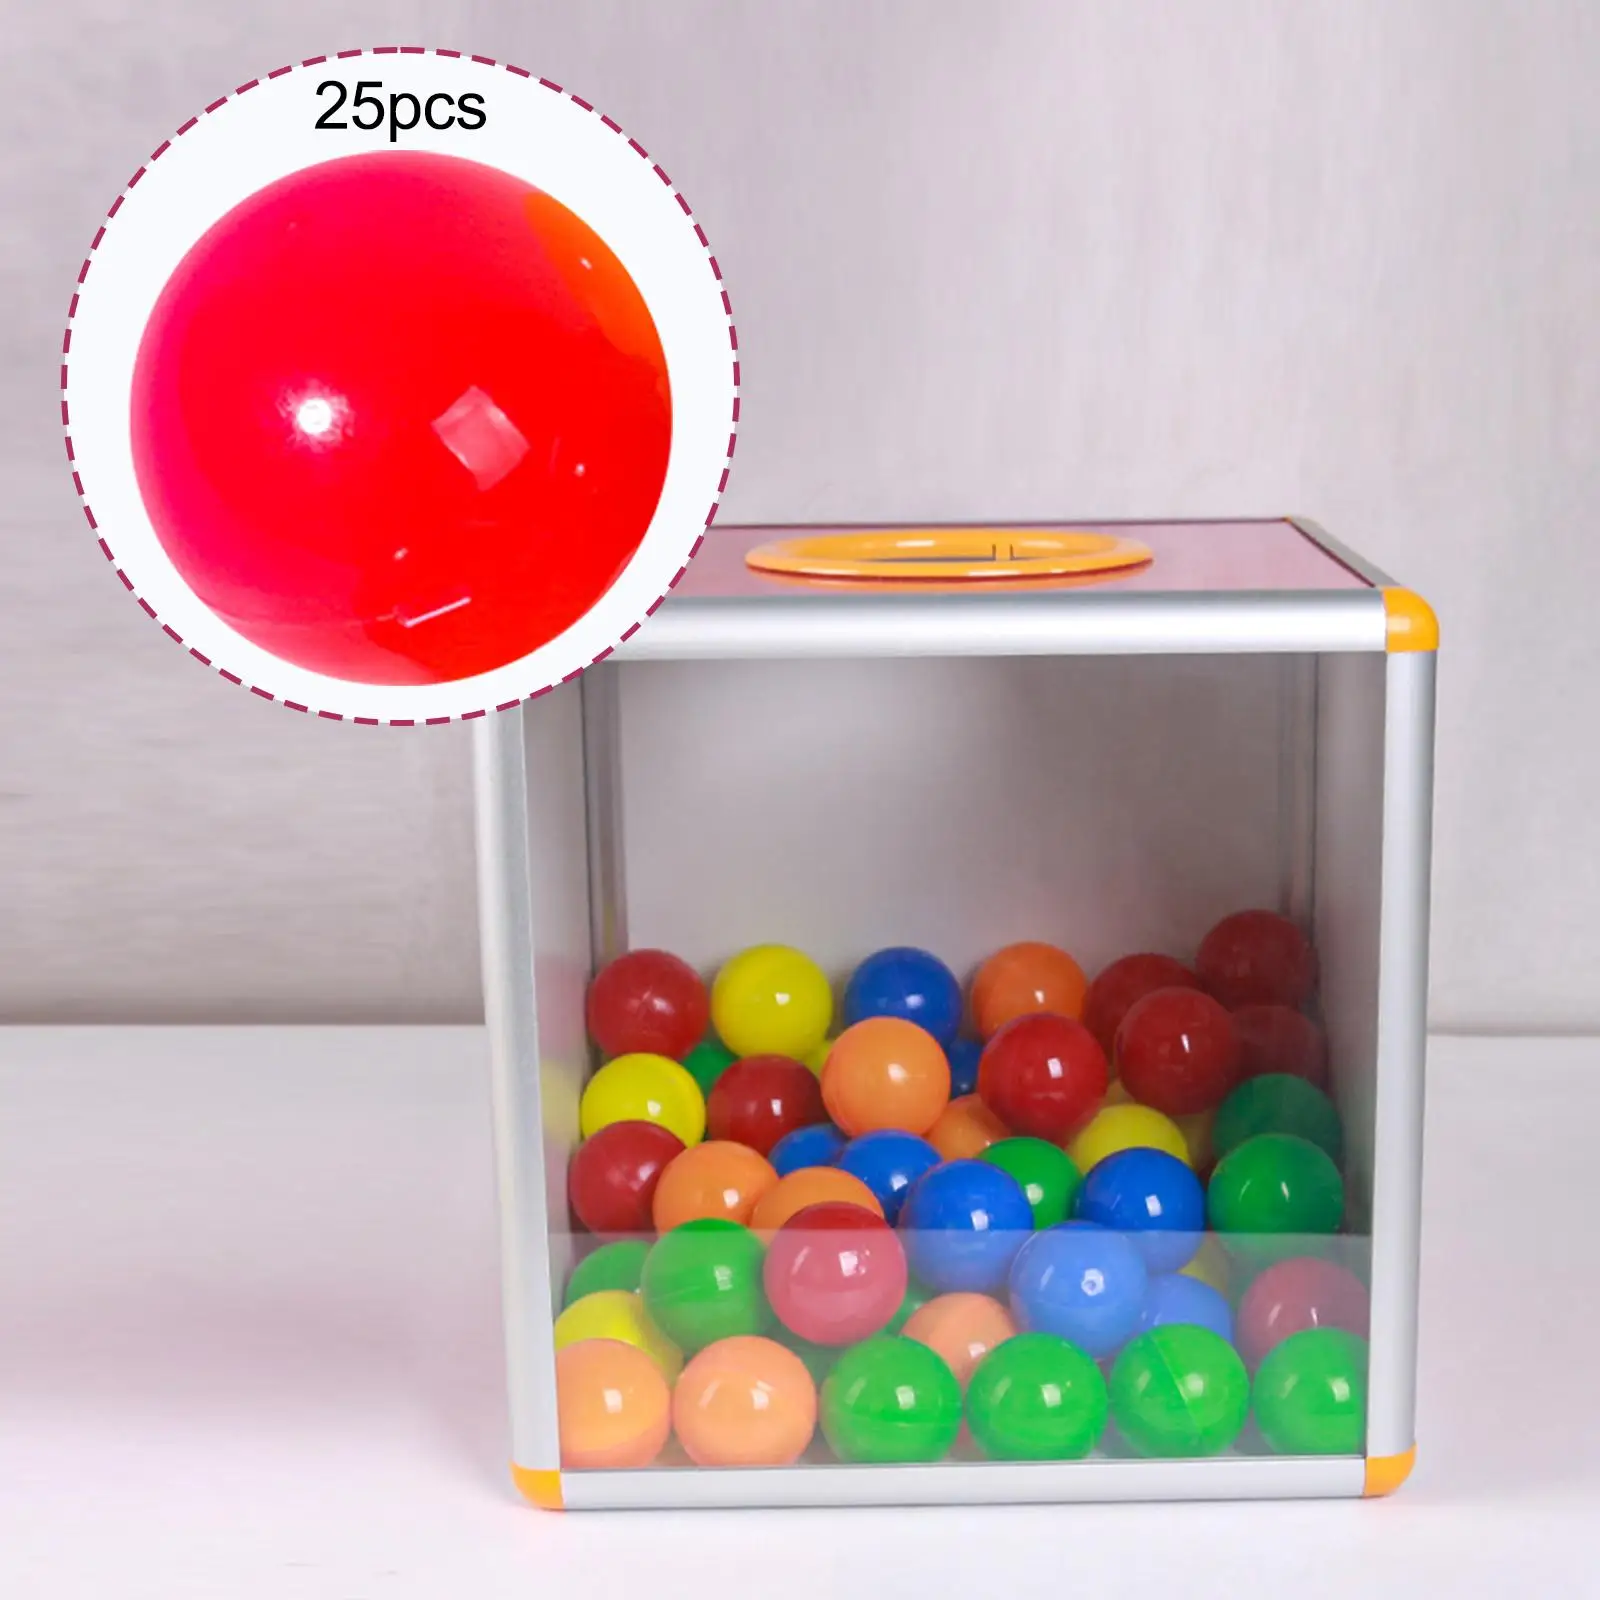 25Pcs Bingo Ball Replacement Attachments Portable Calling Balls for Large Group Games Office Regal Game Entertainment Traveling